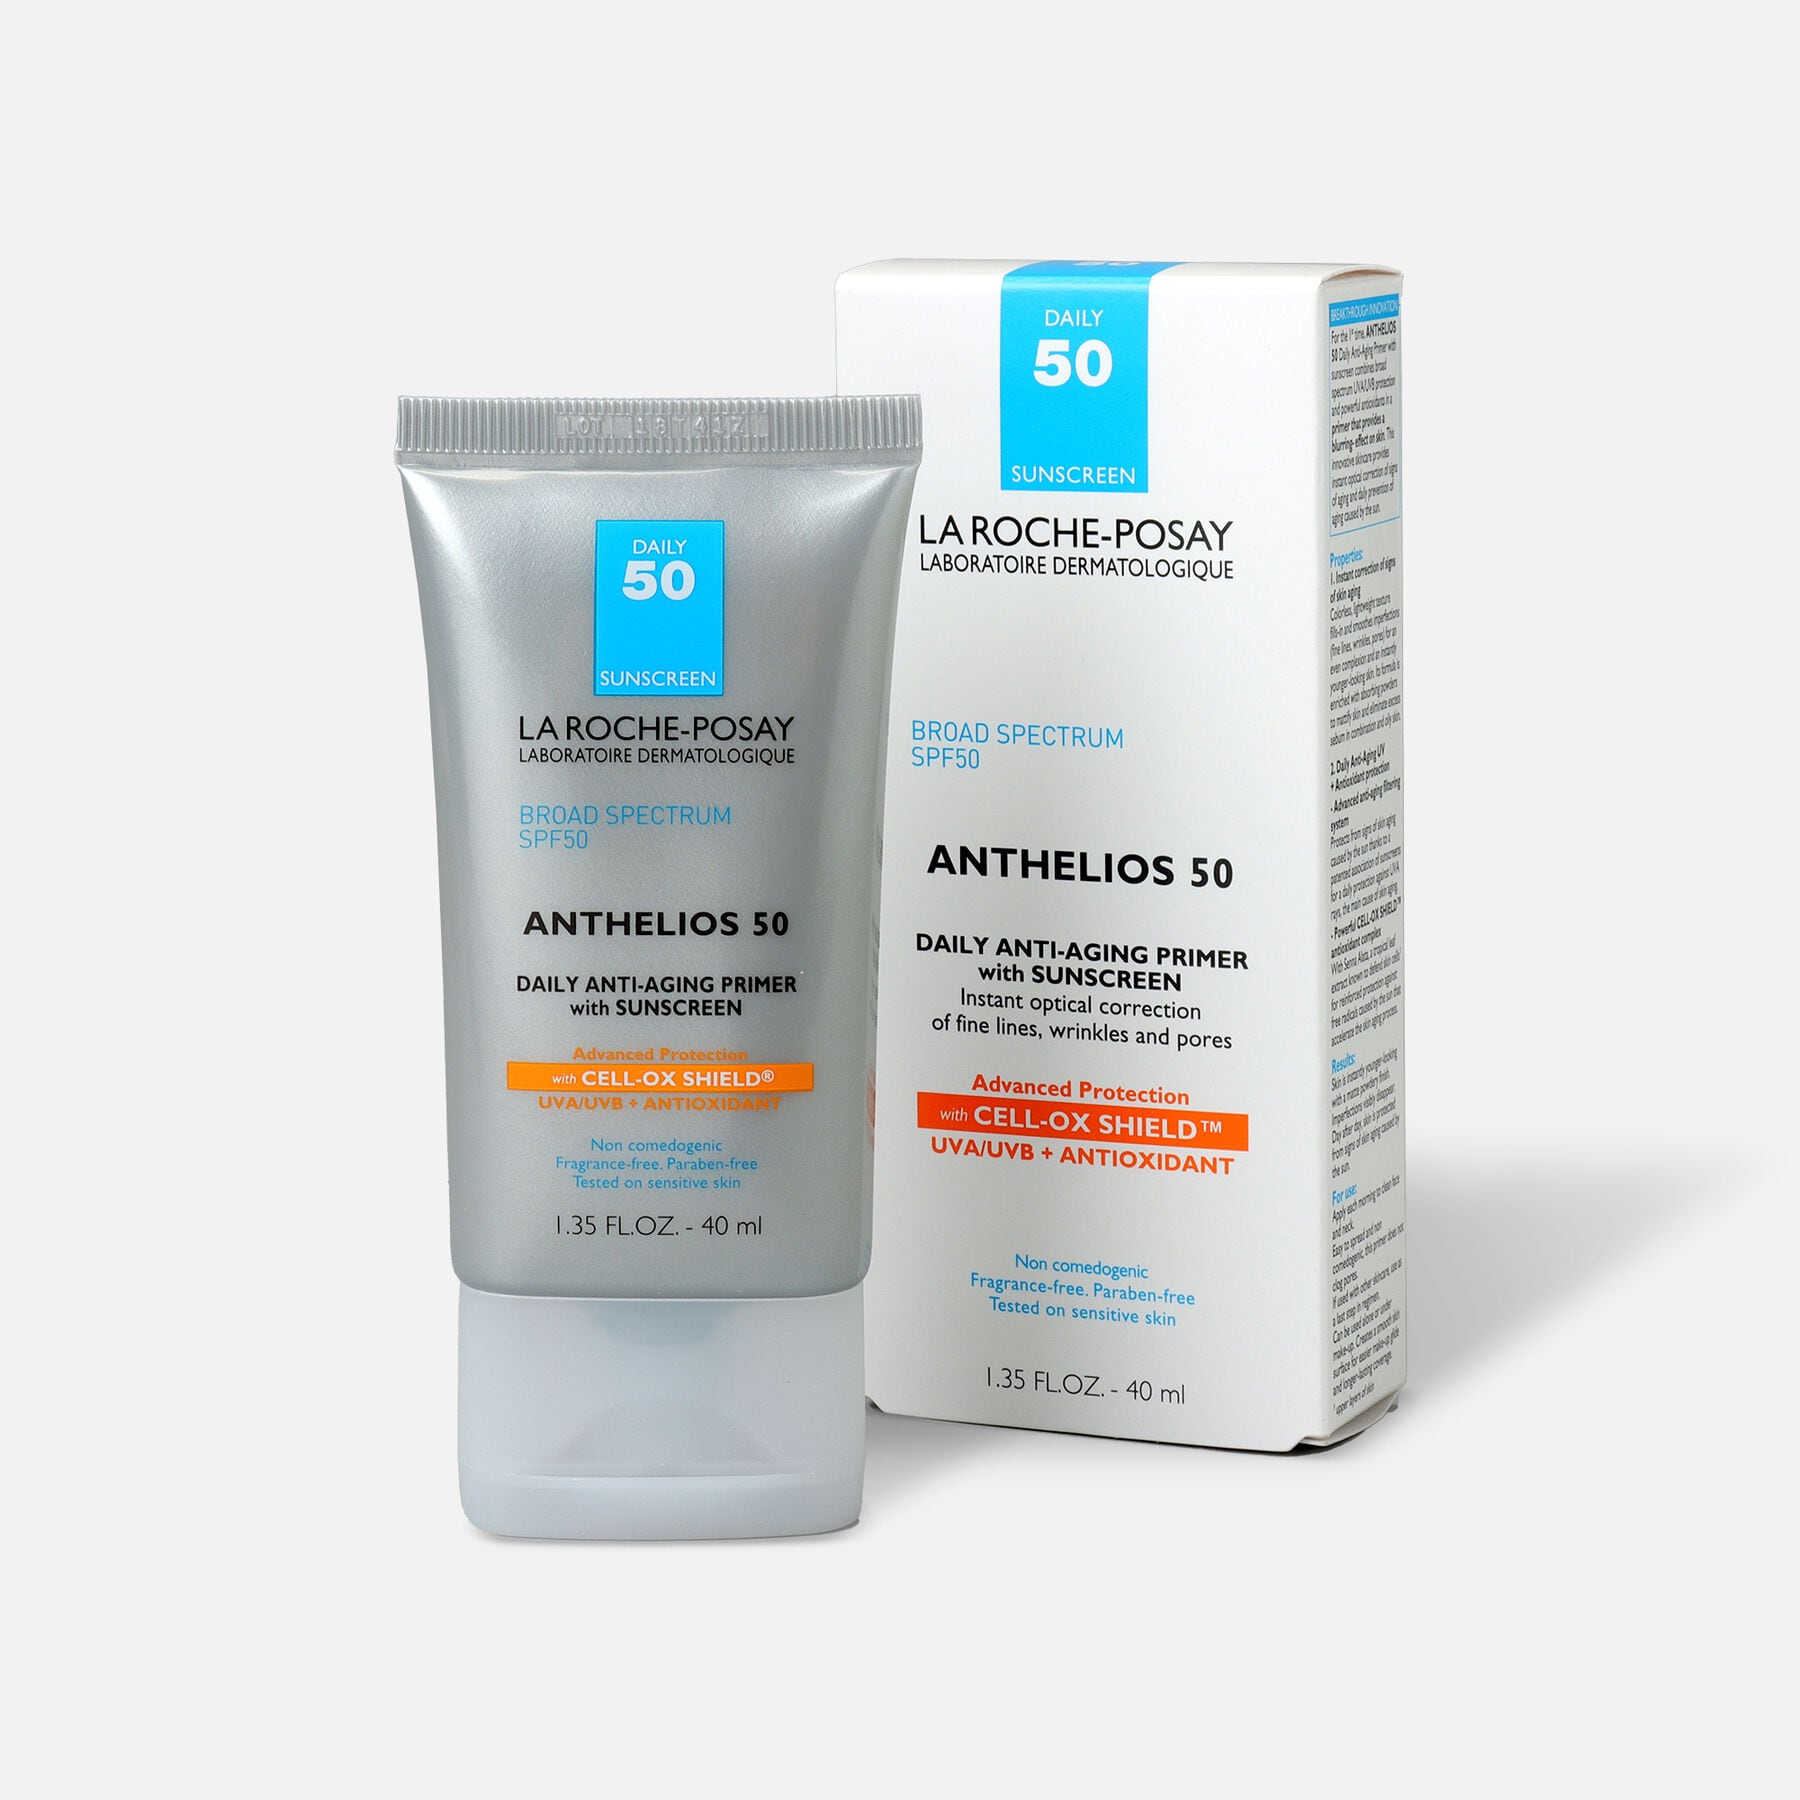 La Roche-Posay Anthelios Daily Wear Primer Face Sunscreen, SPF 50 with  Antioxidants, 1.35 fl oz.